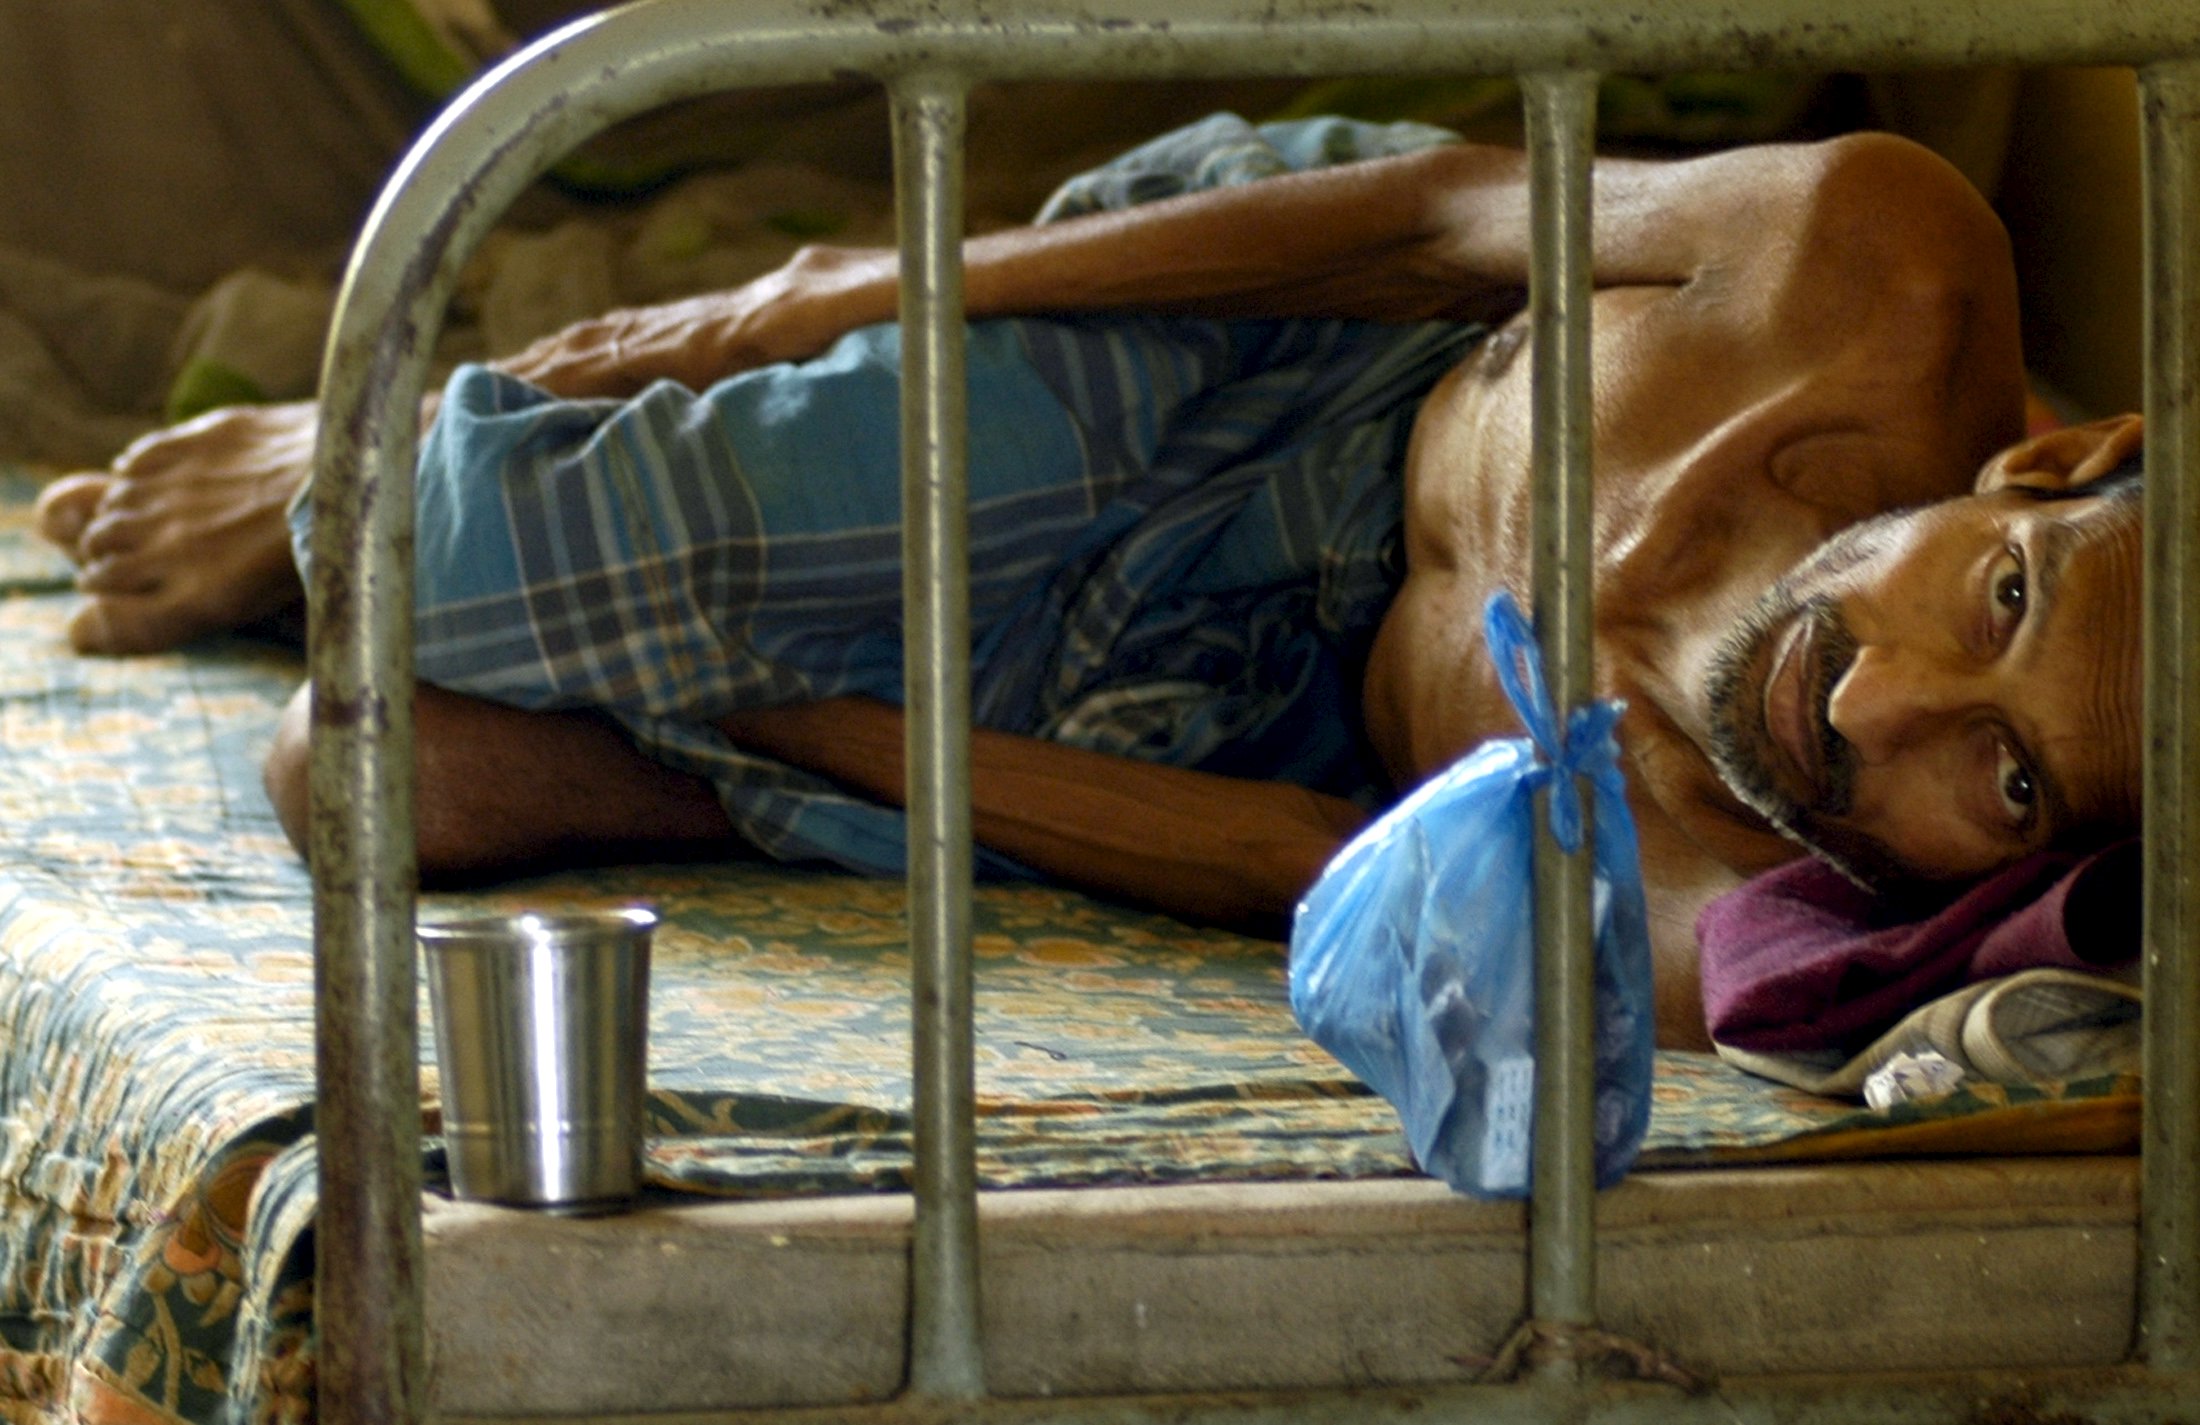 A patient suffering from Tuberculosis rests inside a hospital in Agartala, capital of India's northeastern state of Tripura, in this March 24, 2009 file photo. REUTERS/Jayanta Dey/Files